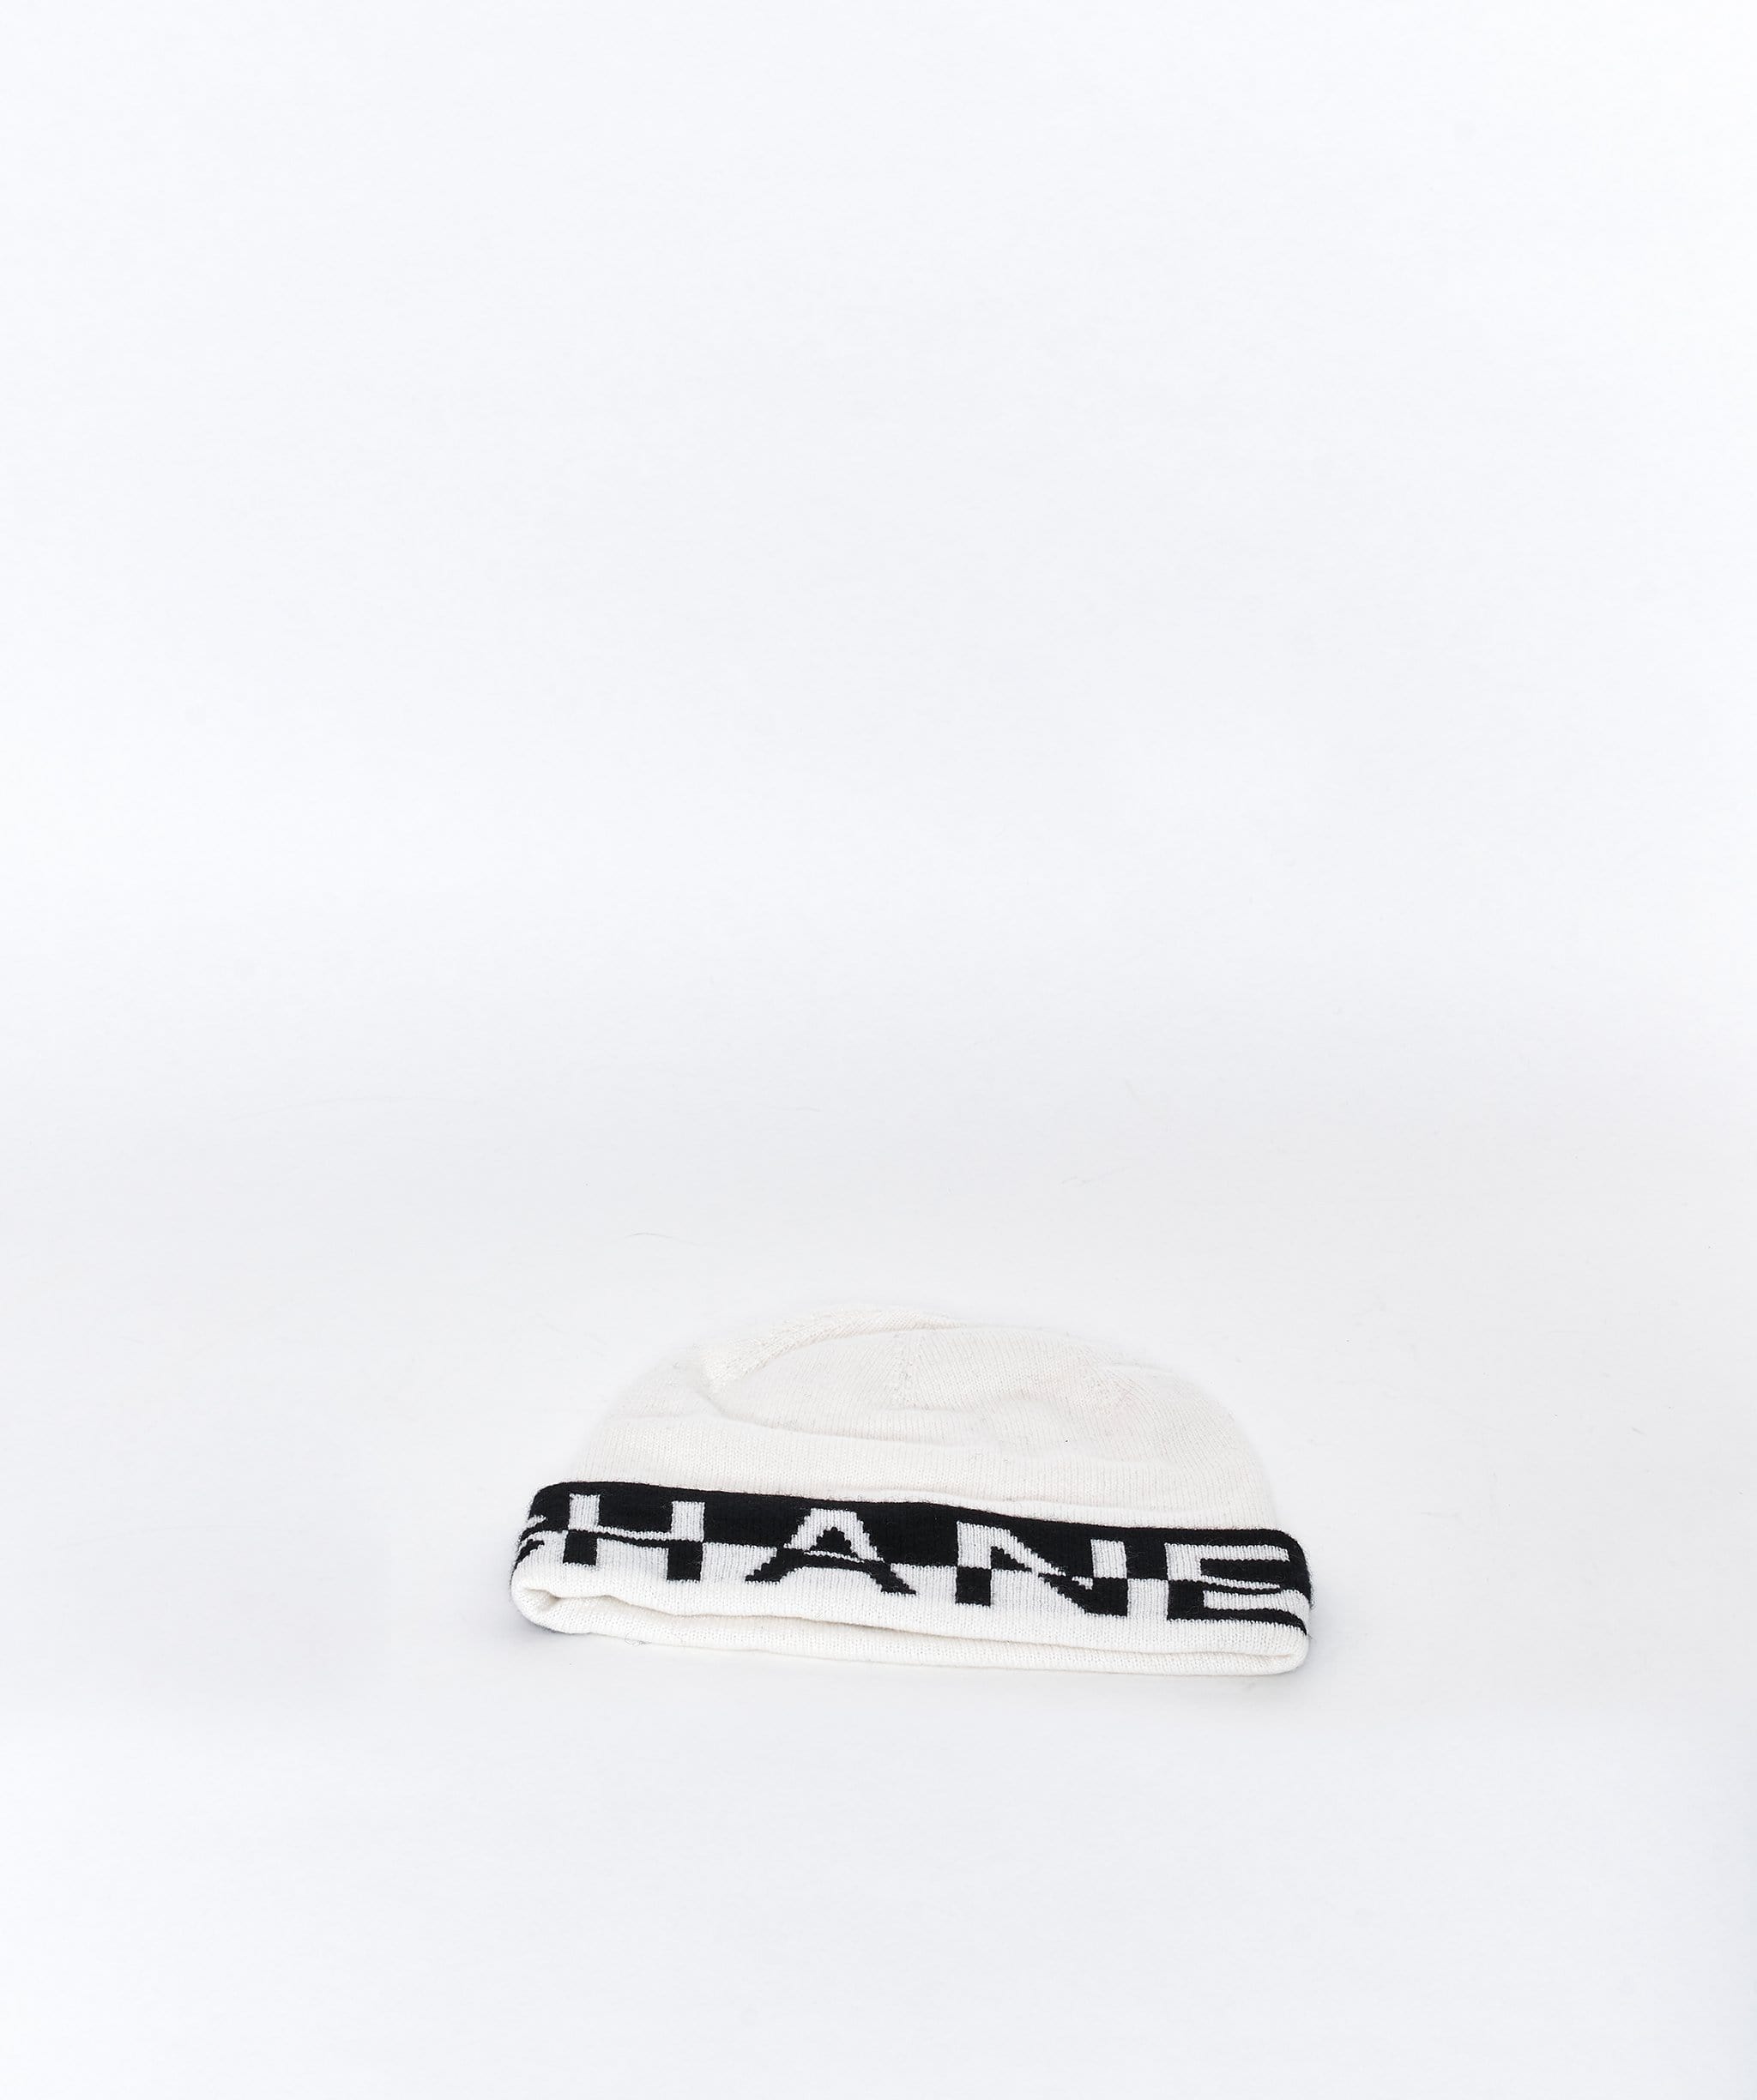 Chanel Chanel white hat with black and white Chanel lettering